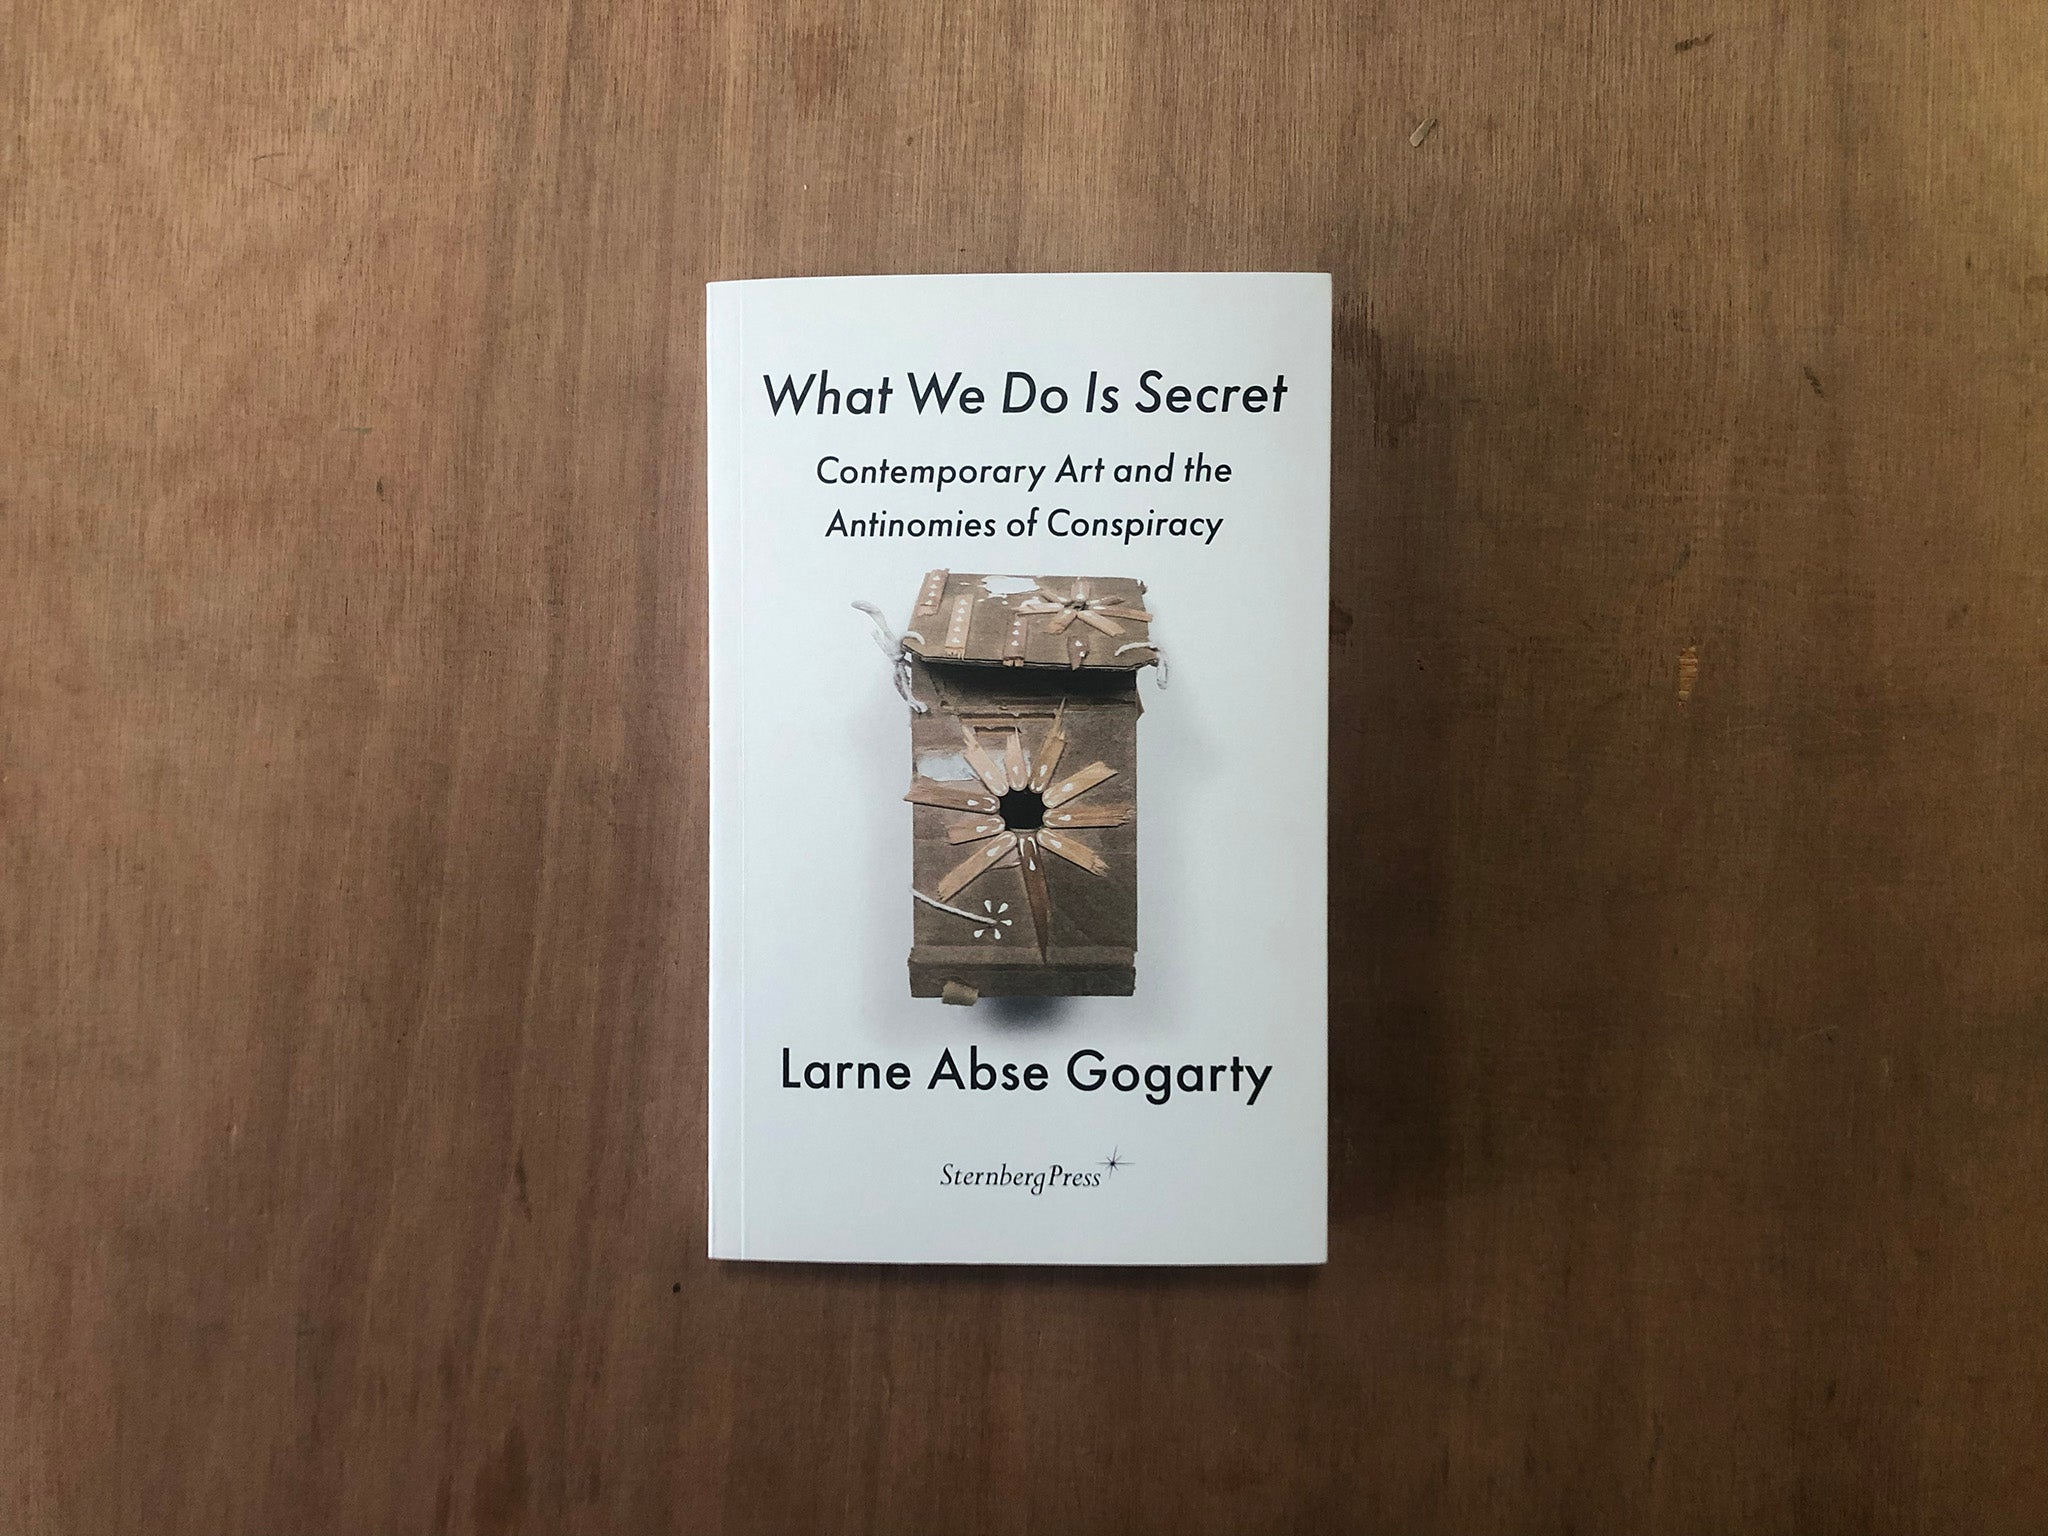 WHAT WE DO IS SECRET, CONTEMPORARY ART AND THE ANTINOMIES OF CONSPIRACY by Larne Abse Gogarty